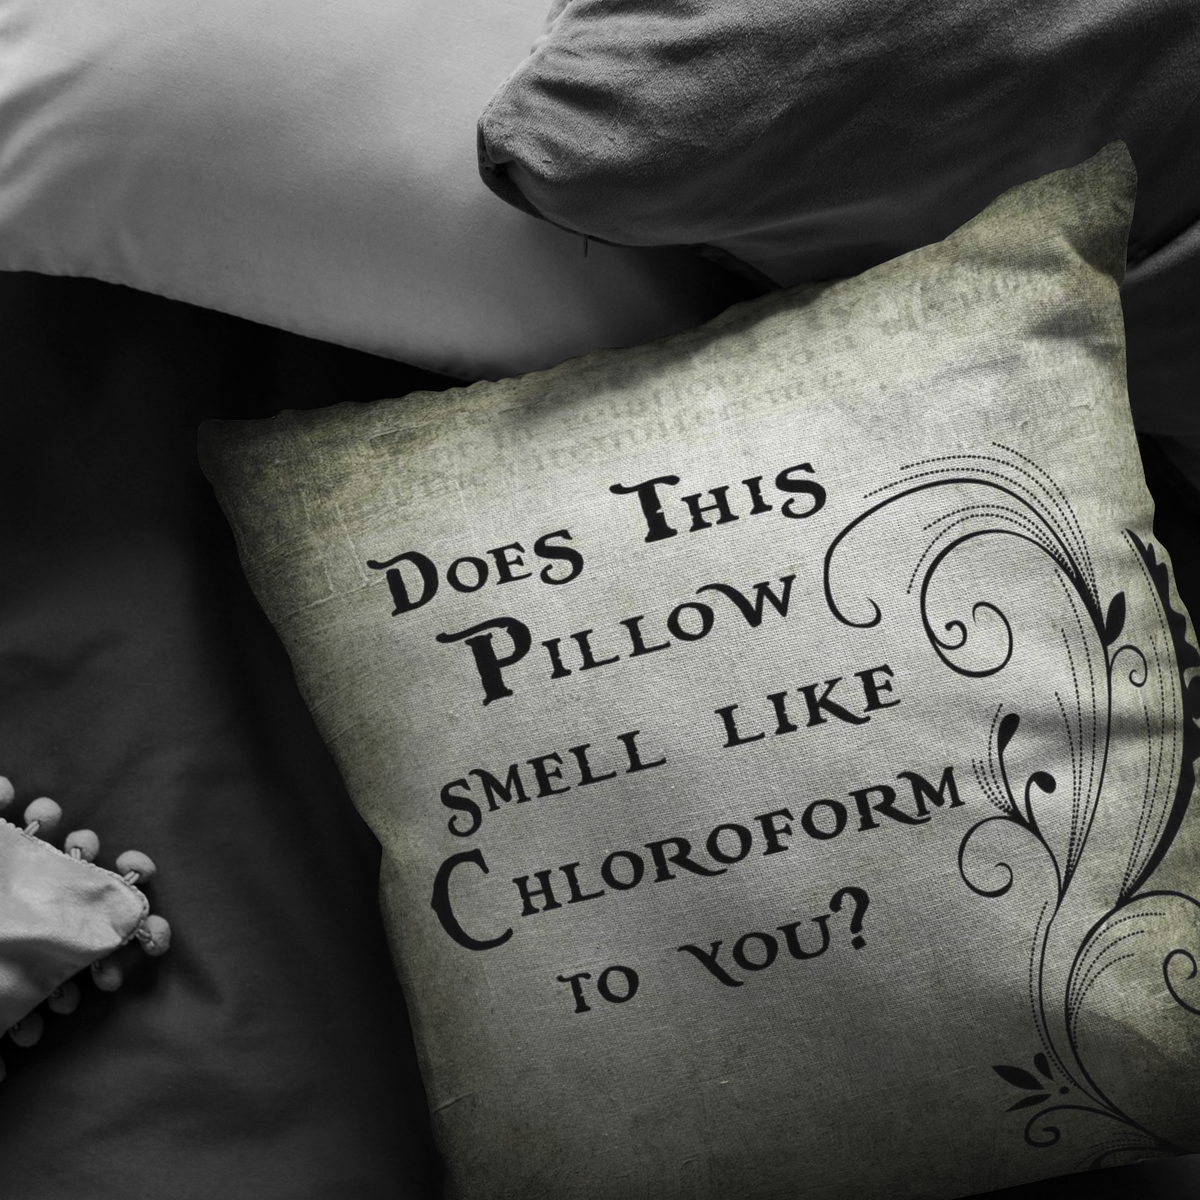 Decorative Throw Pillow Does this Smell Like Chloroform